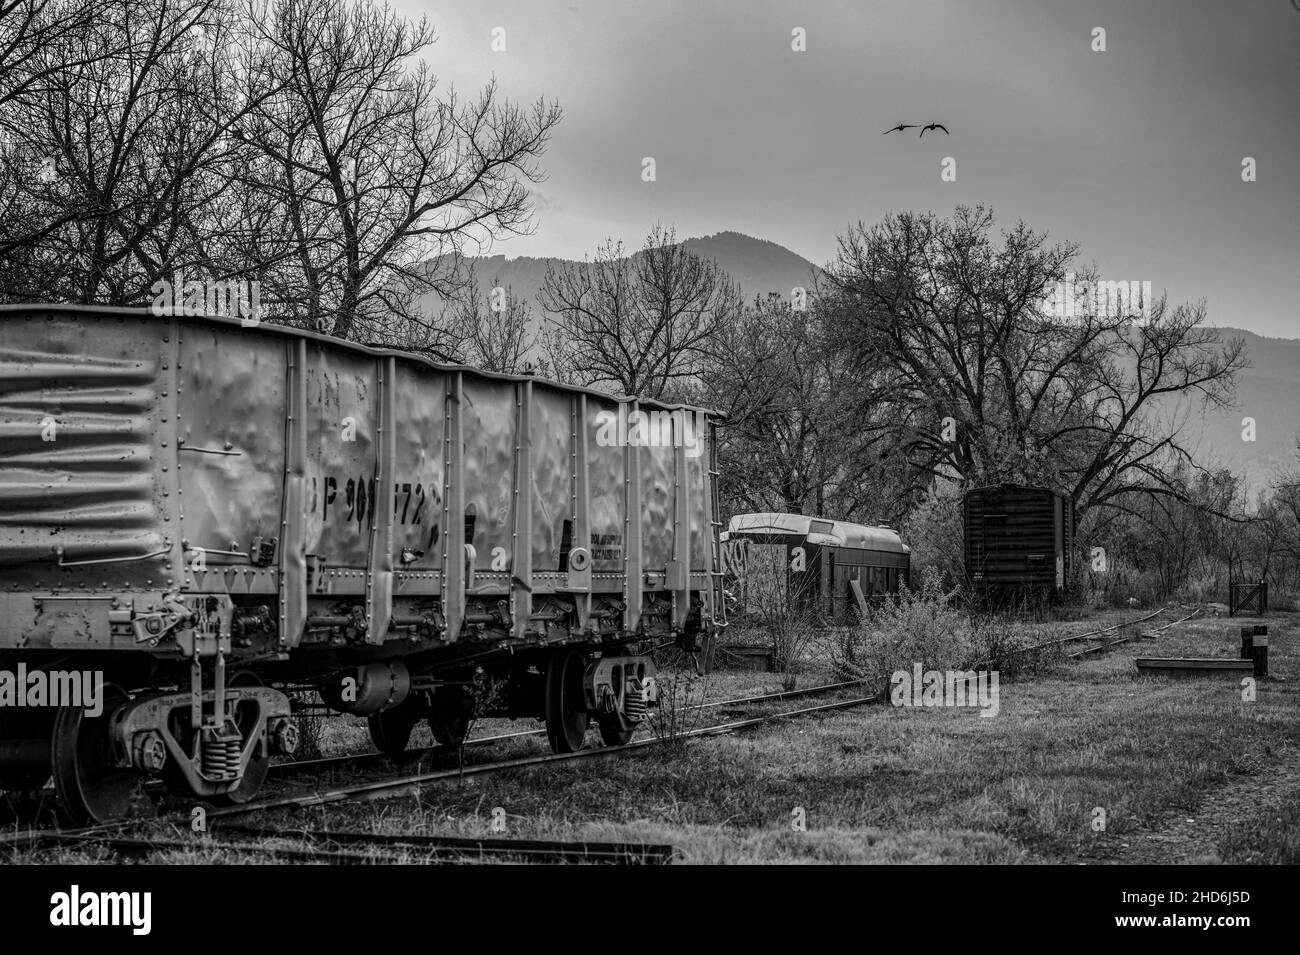 Grayscale shot of an old abandoned gondola car on a railway track surrounded by trees Stock Photo